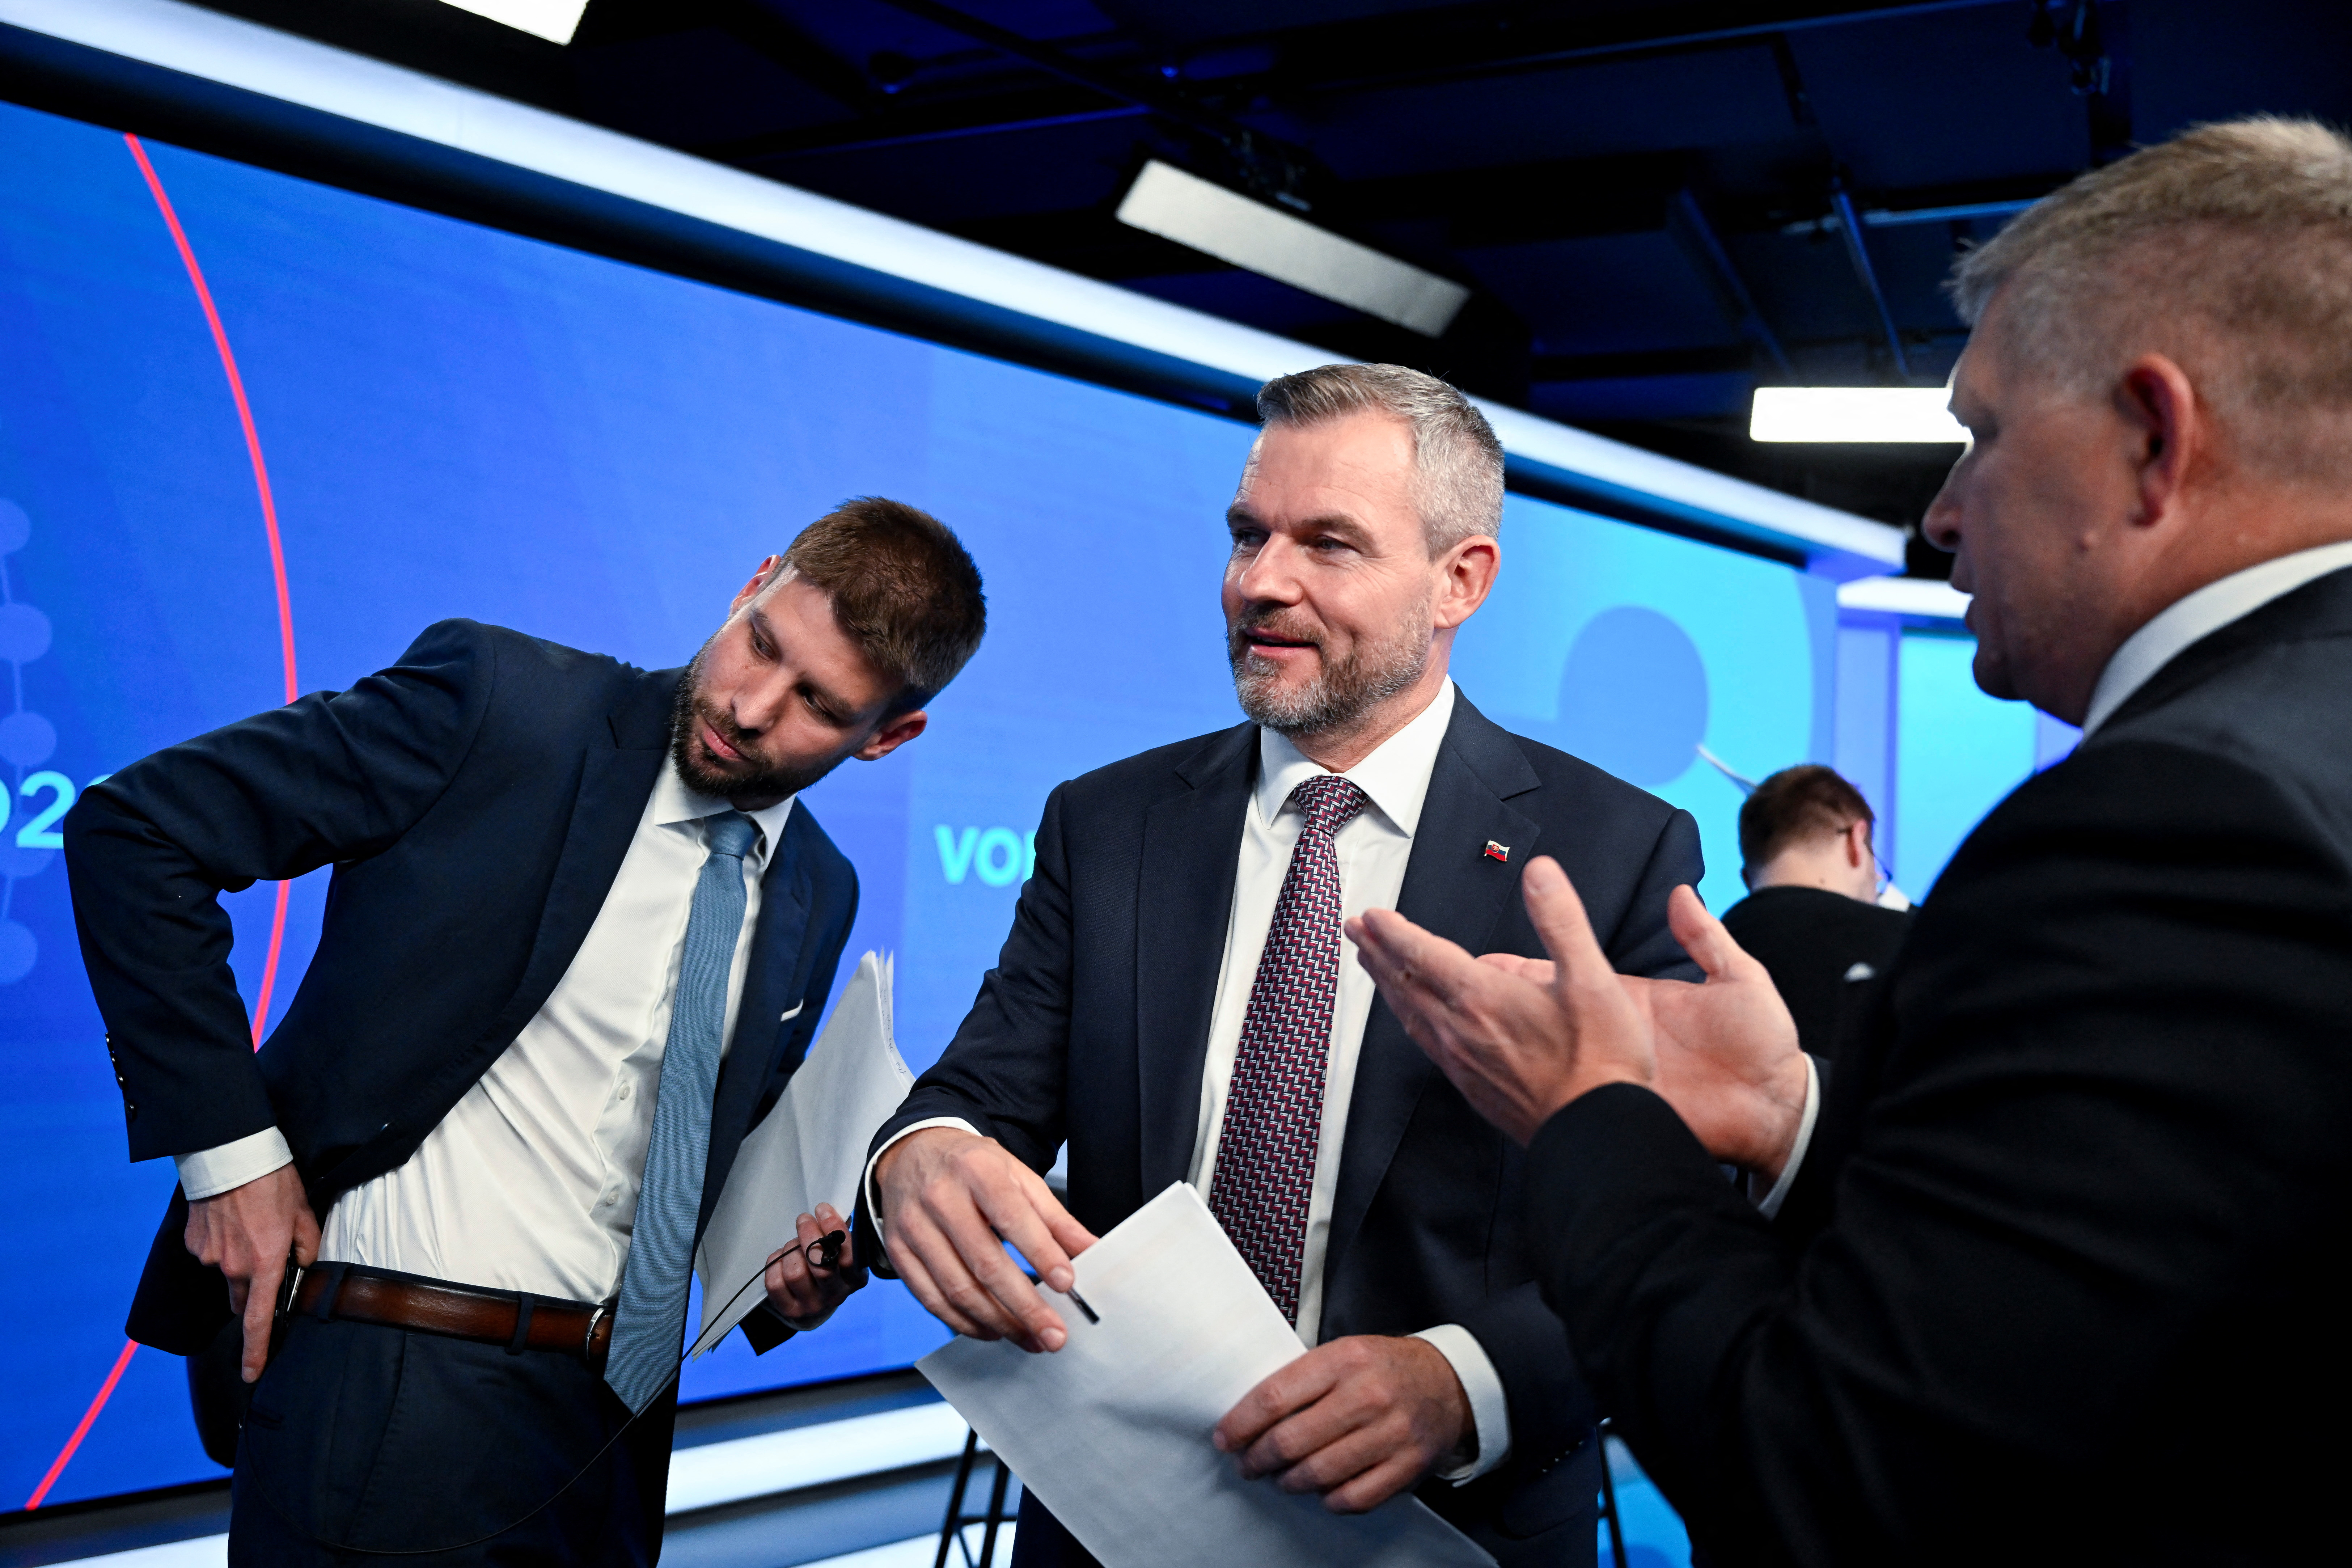 Michal Simecka, leader of the Progressive Slovakia party, Peter Pellegrini, leader of the HLAS party, and Robert Fico, leader of the SMER-SSD party, stand next to each other after a televised debate at TV TA3